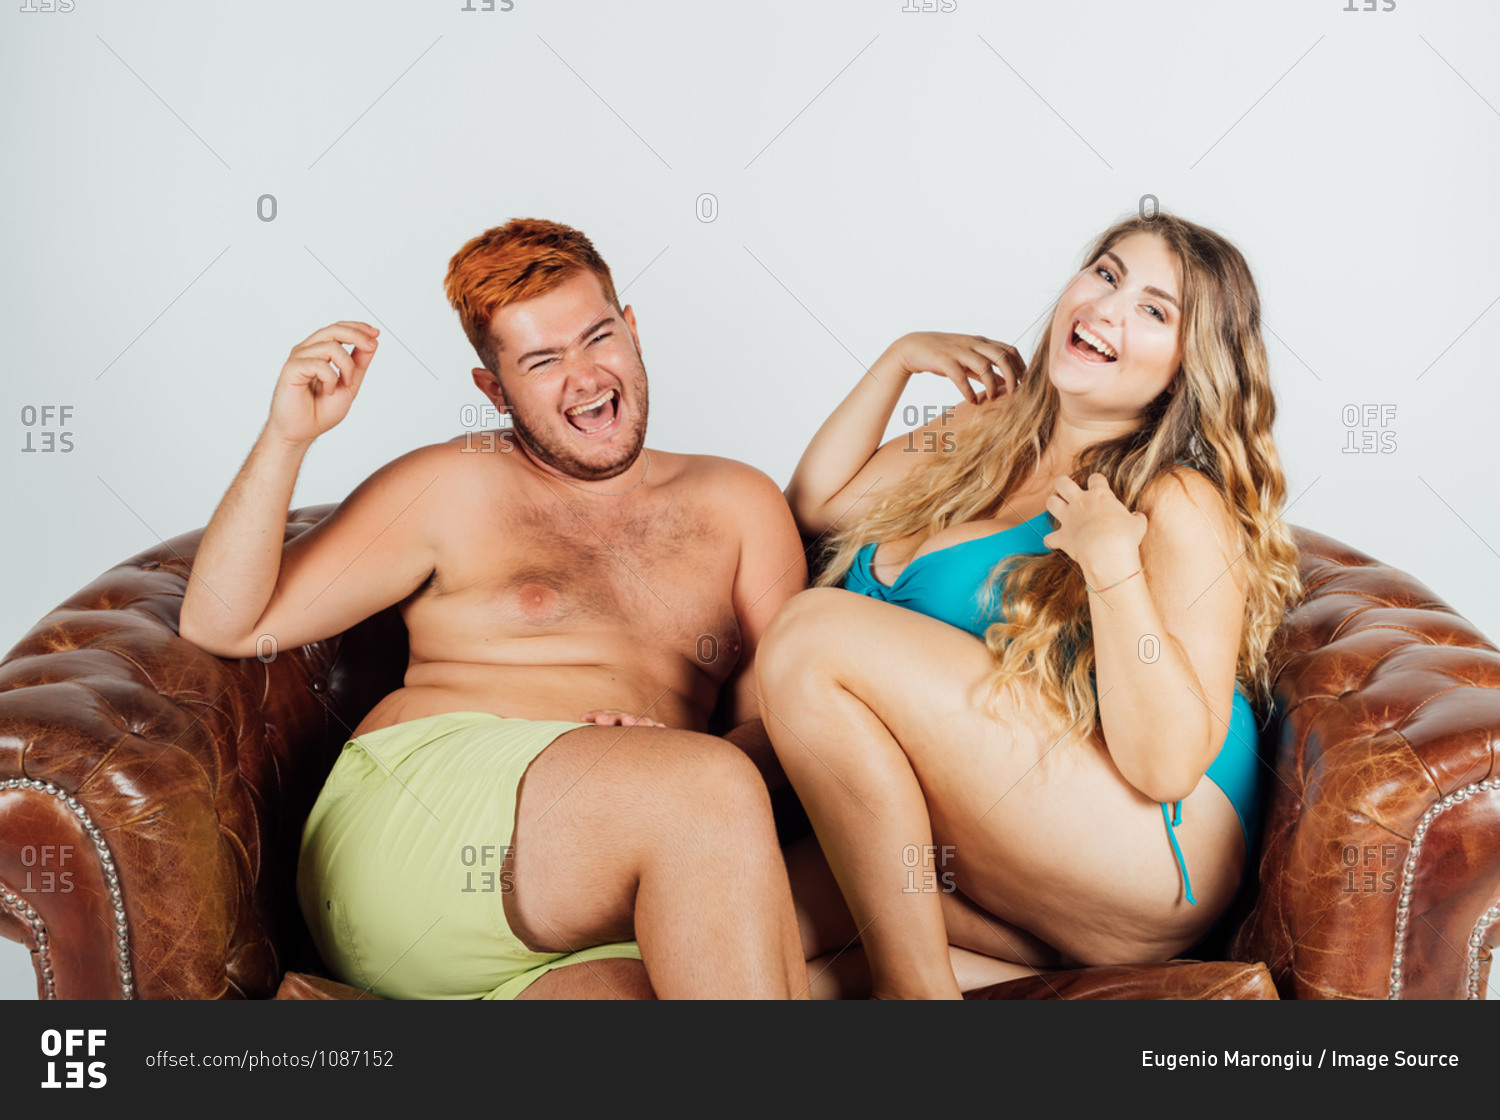 Young man and woman laughing, on sofa, partially clothed